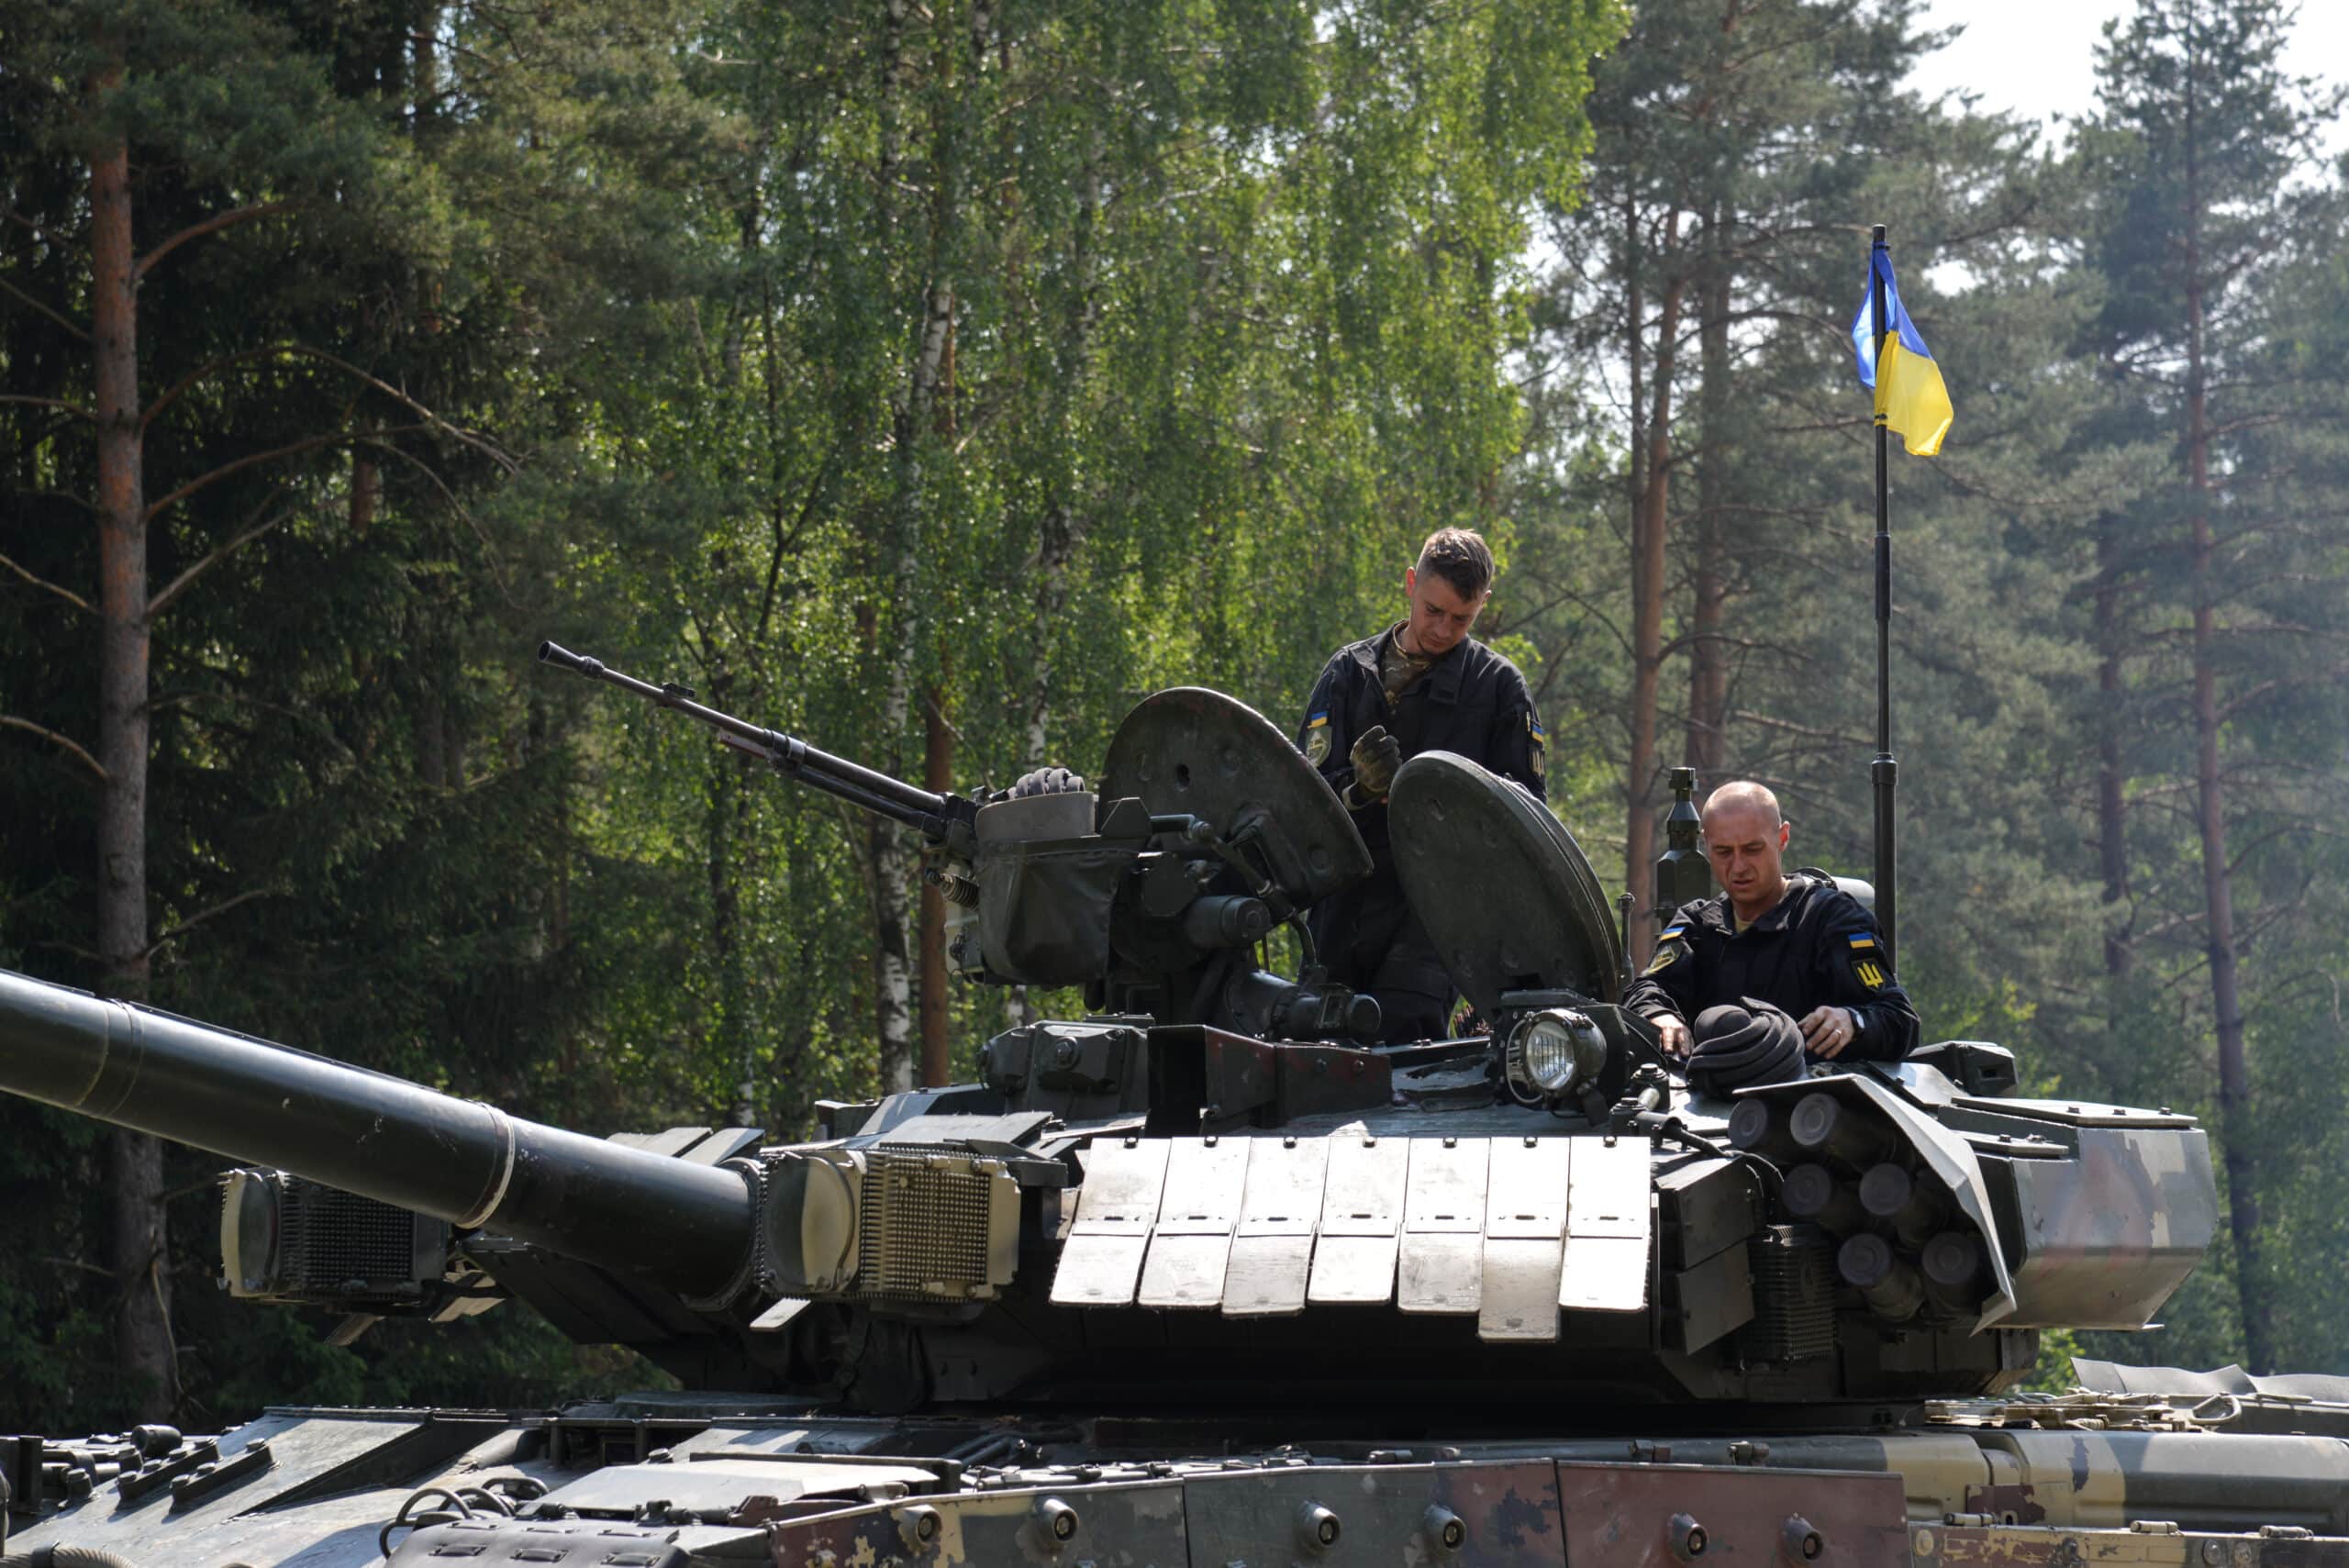 Ukraine Forces of the Mechanical Brigade standing atop a tank